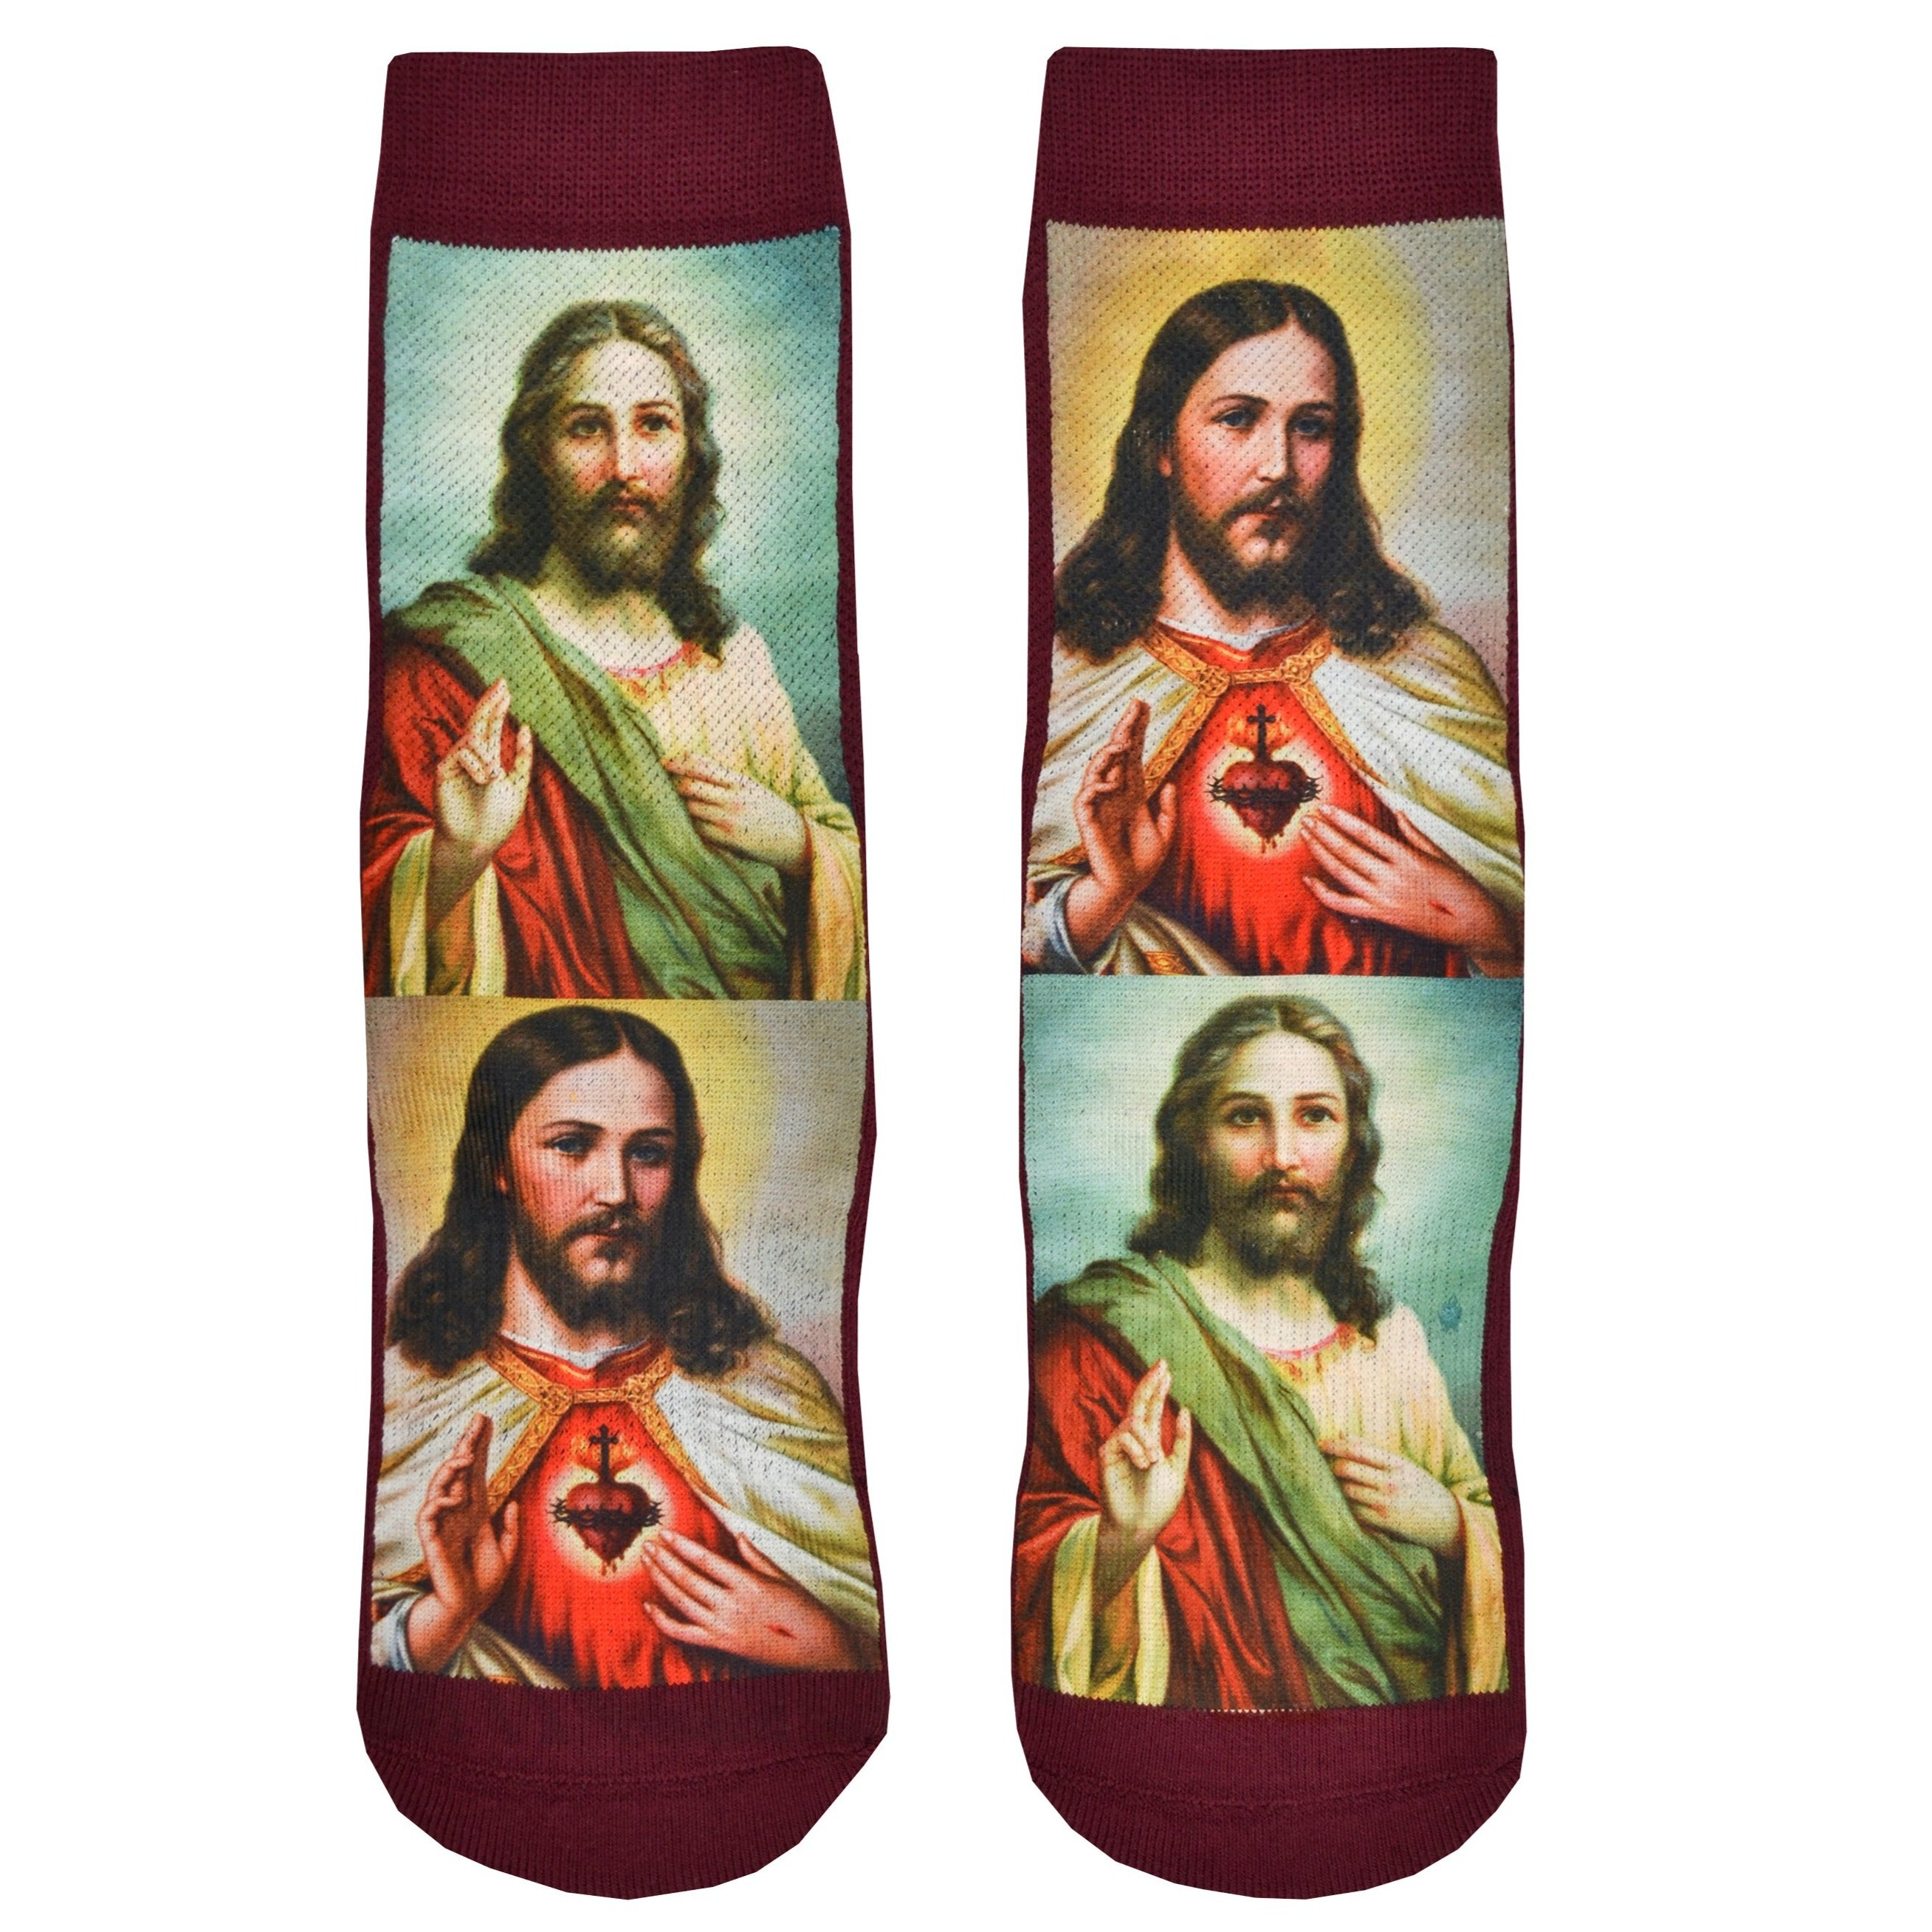 Shown in a flatlay, a pair of polyester and cotton Good Luck Sock brand maroon socks with two iconic depictions of Jesus Christ.